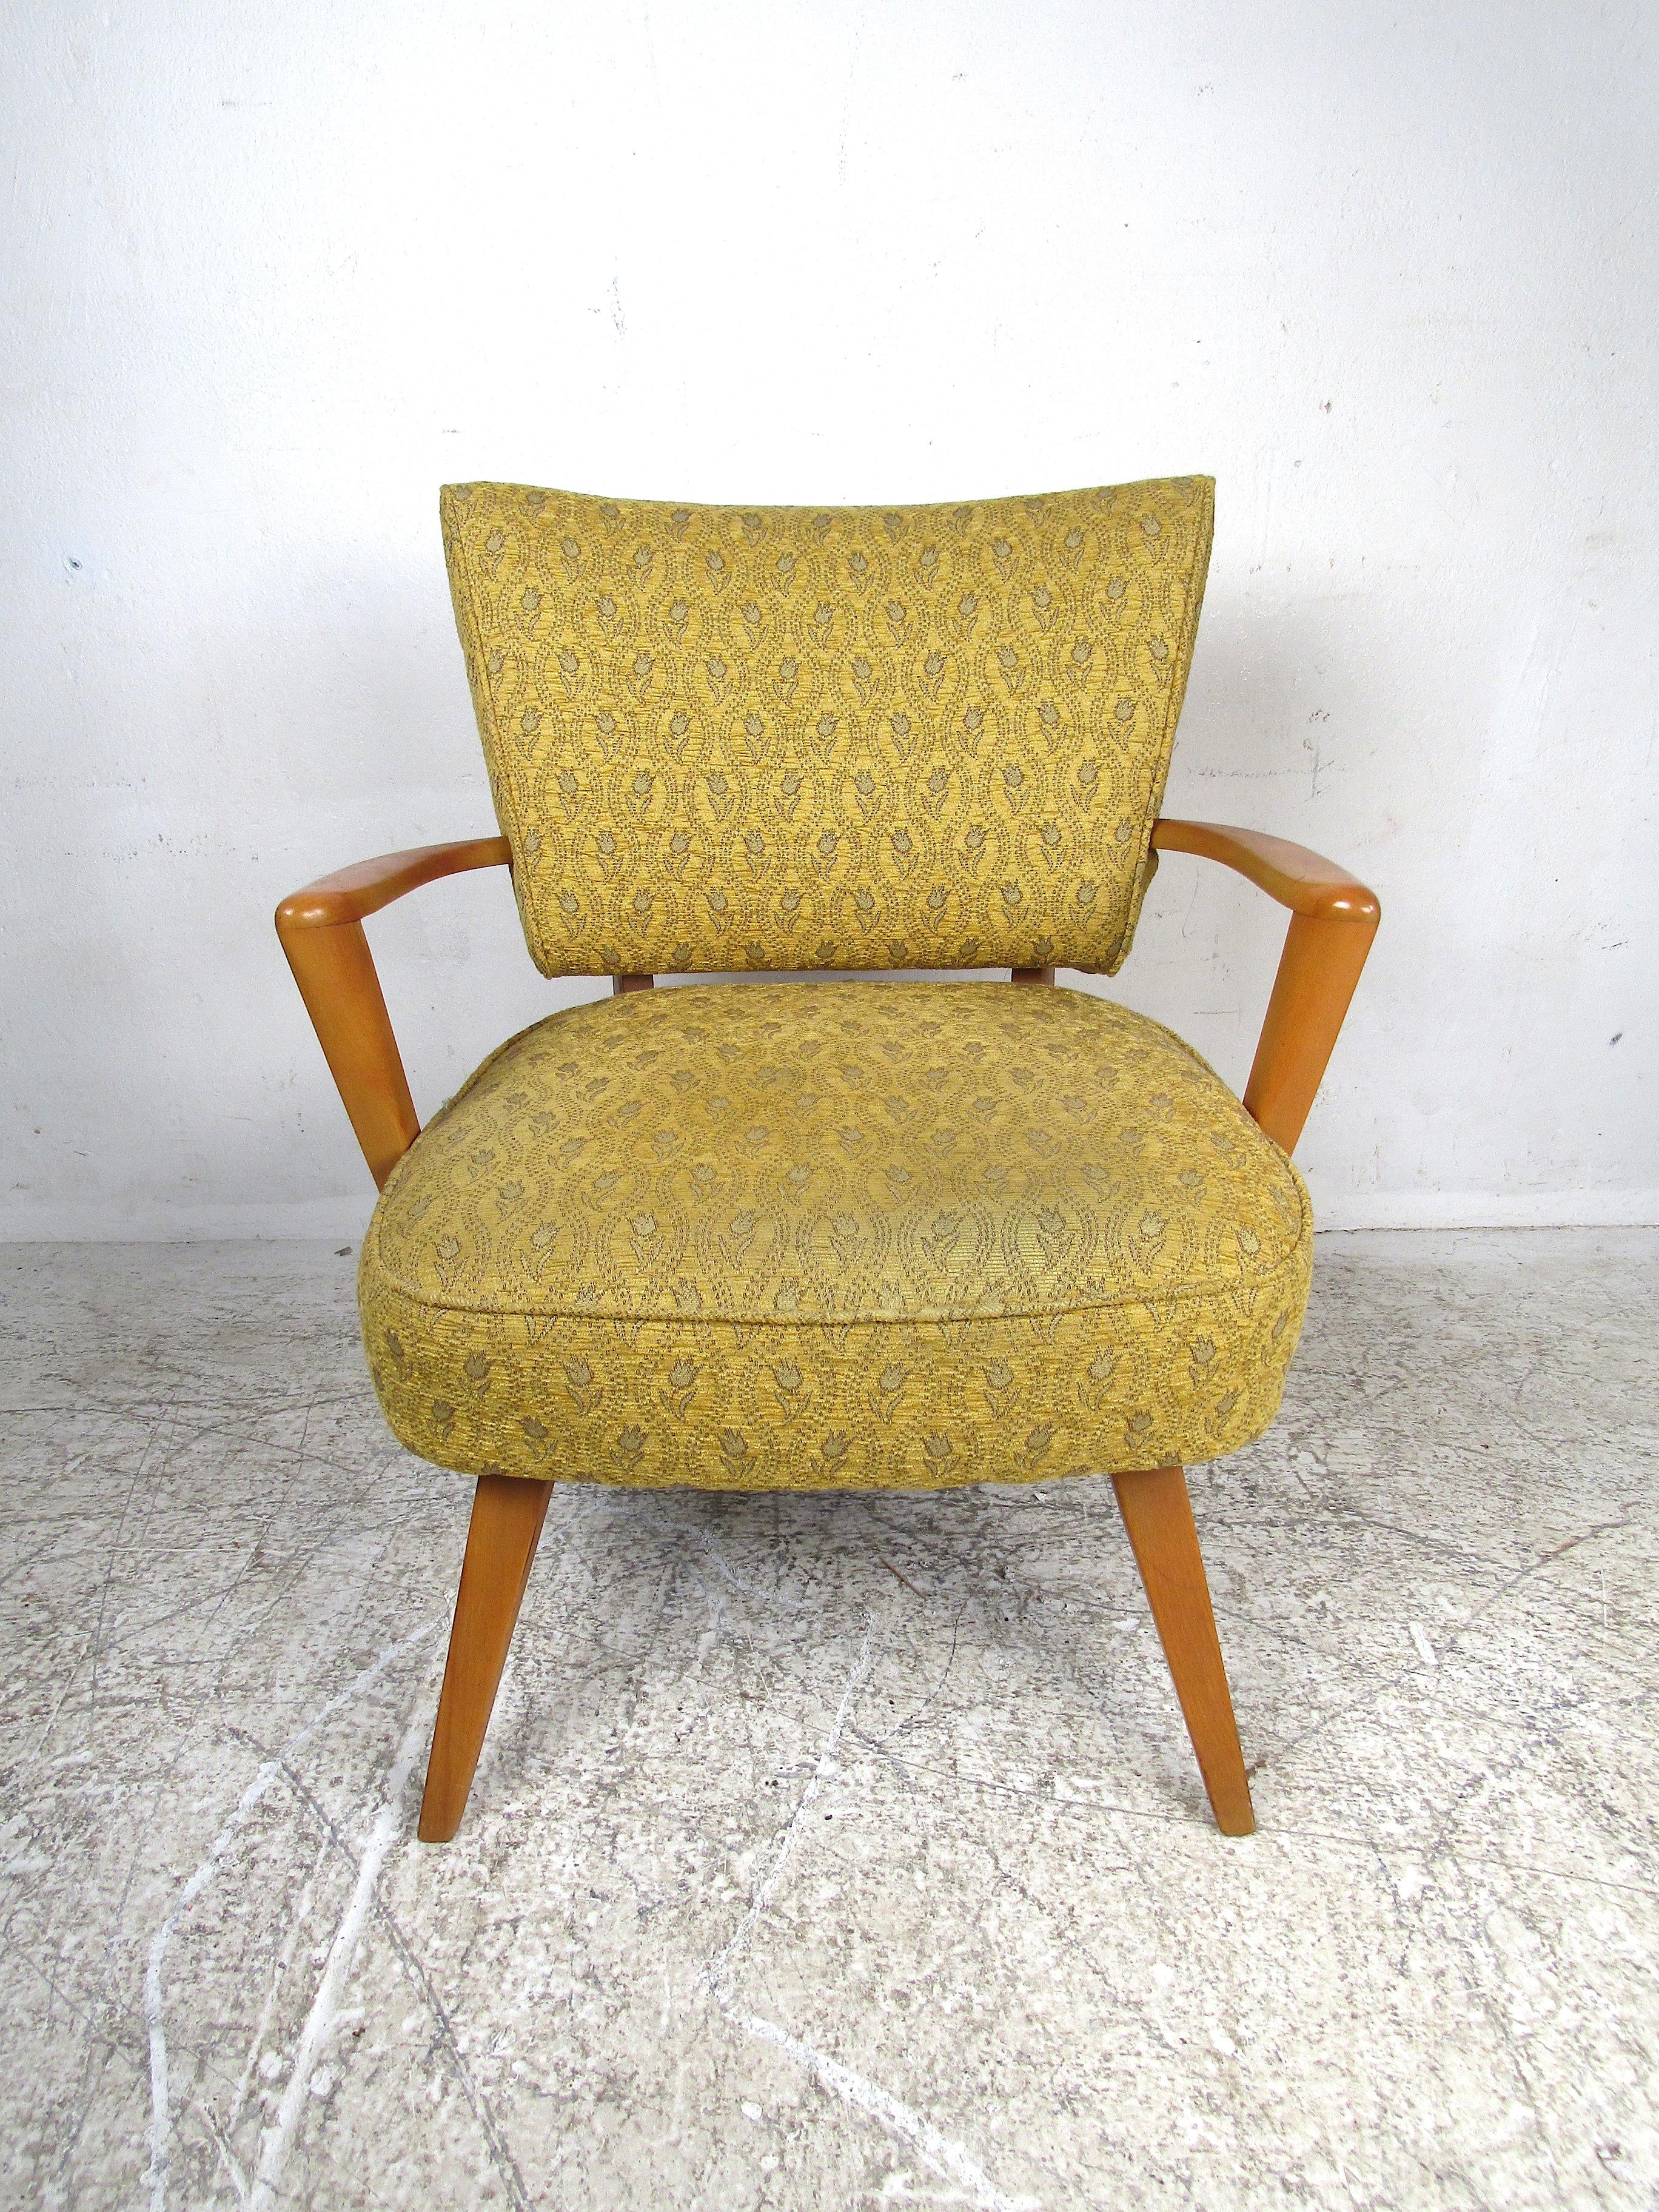 Petite vintage armchair with a floral pattern upholstery. Handsome frame with sculpted armrests and splayed legs. Large cushioned seat with a contoured backrest. Please confirm item location with dealer (NJ or NY).